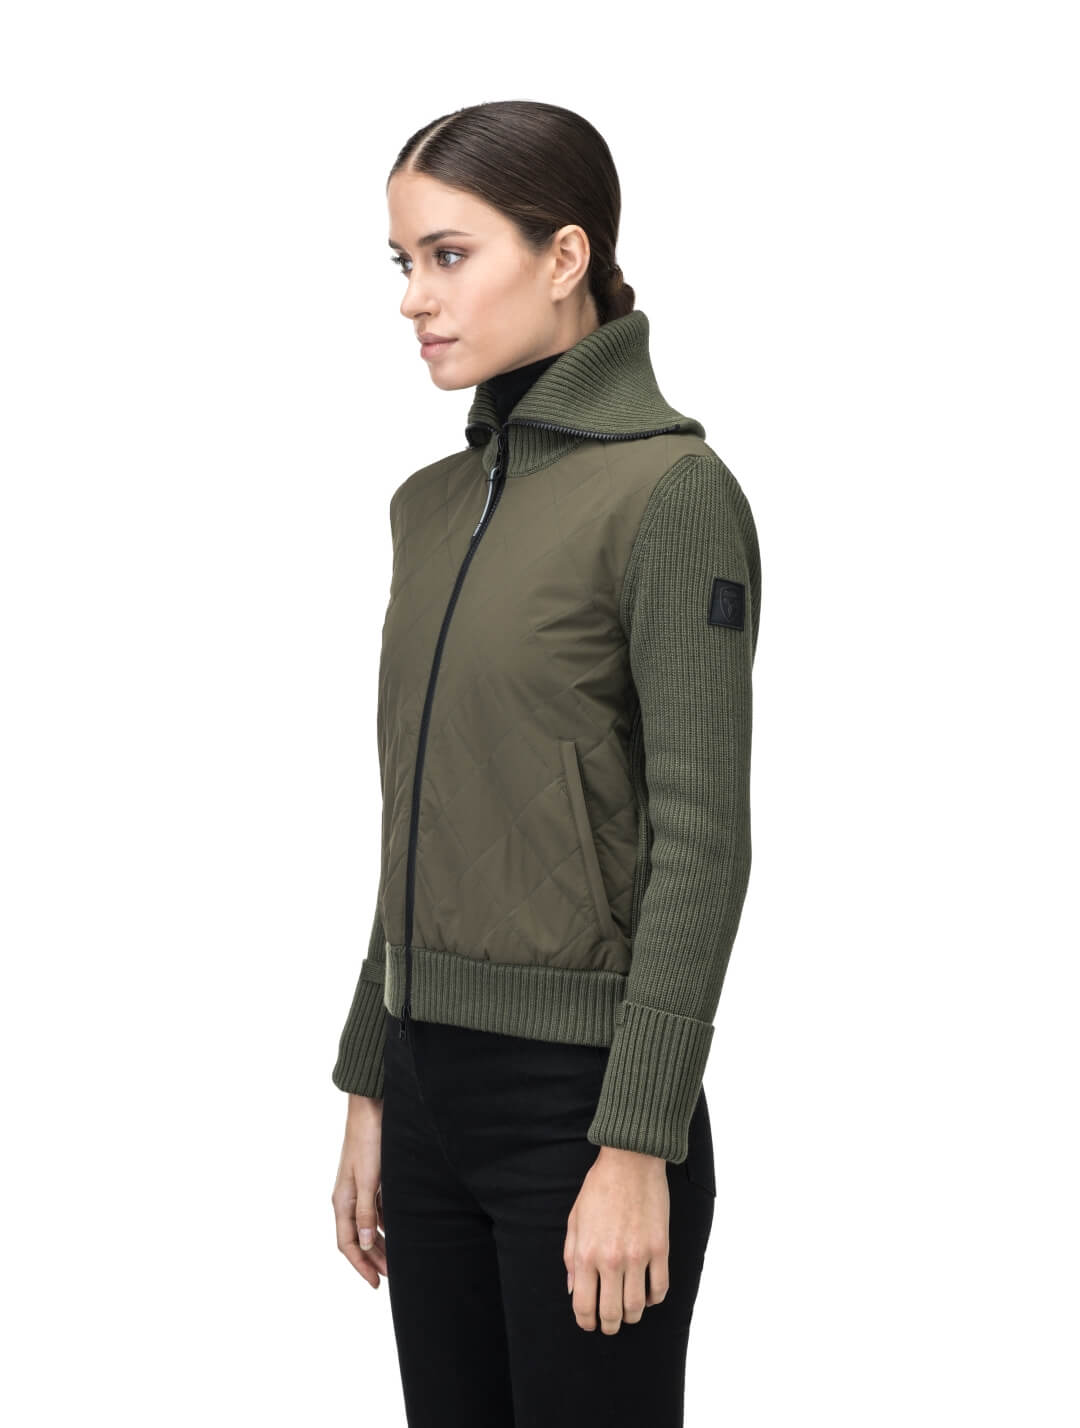 Ada Ladies Quilted Full Zip Sweater in hip length, PrimaLoft Gold Insulation Active+, Durable 4-Way Stretch Weave quilted torso, Merino wool knit collar, sleeves, back, and cuffs, two-way front zipper, and hidden waist pockets, in Fatigue